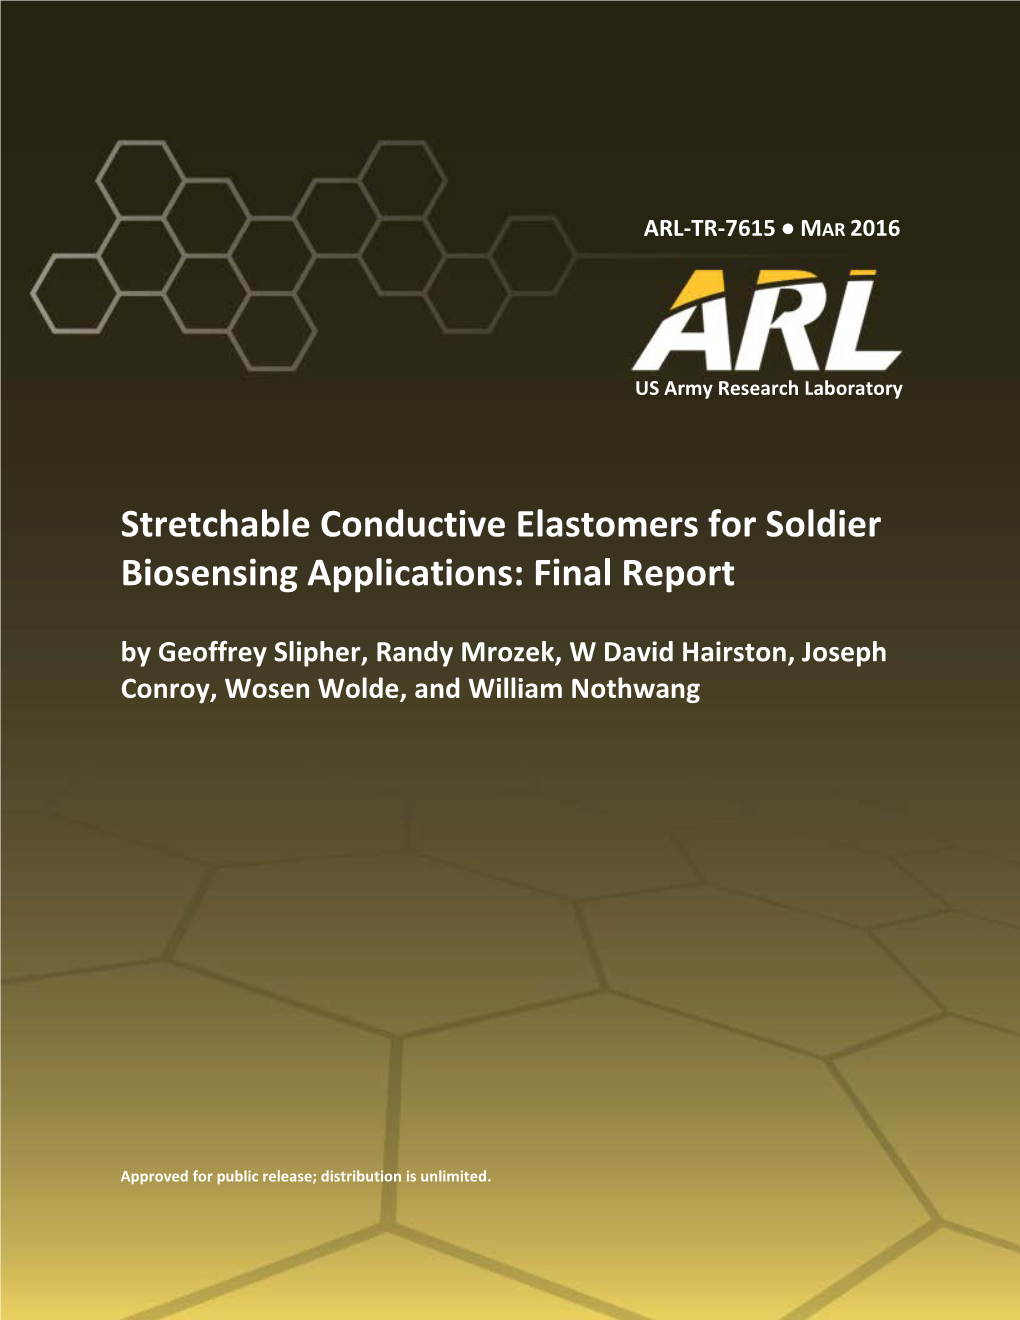 Stretchable Conductive Elastomers for Soldier Biosensing